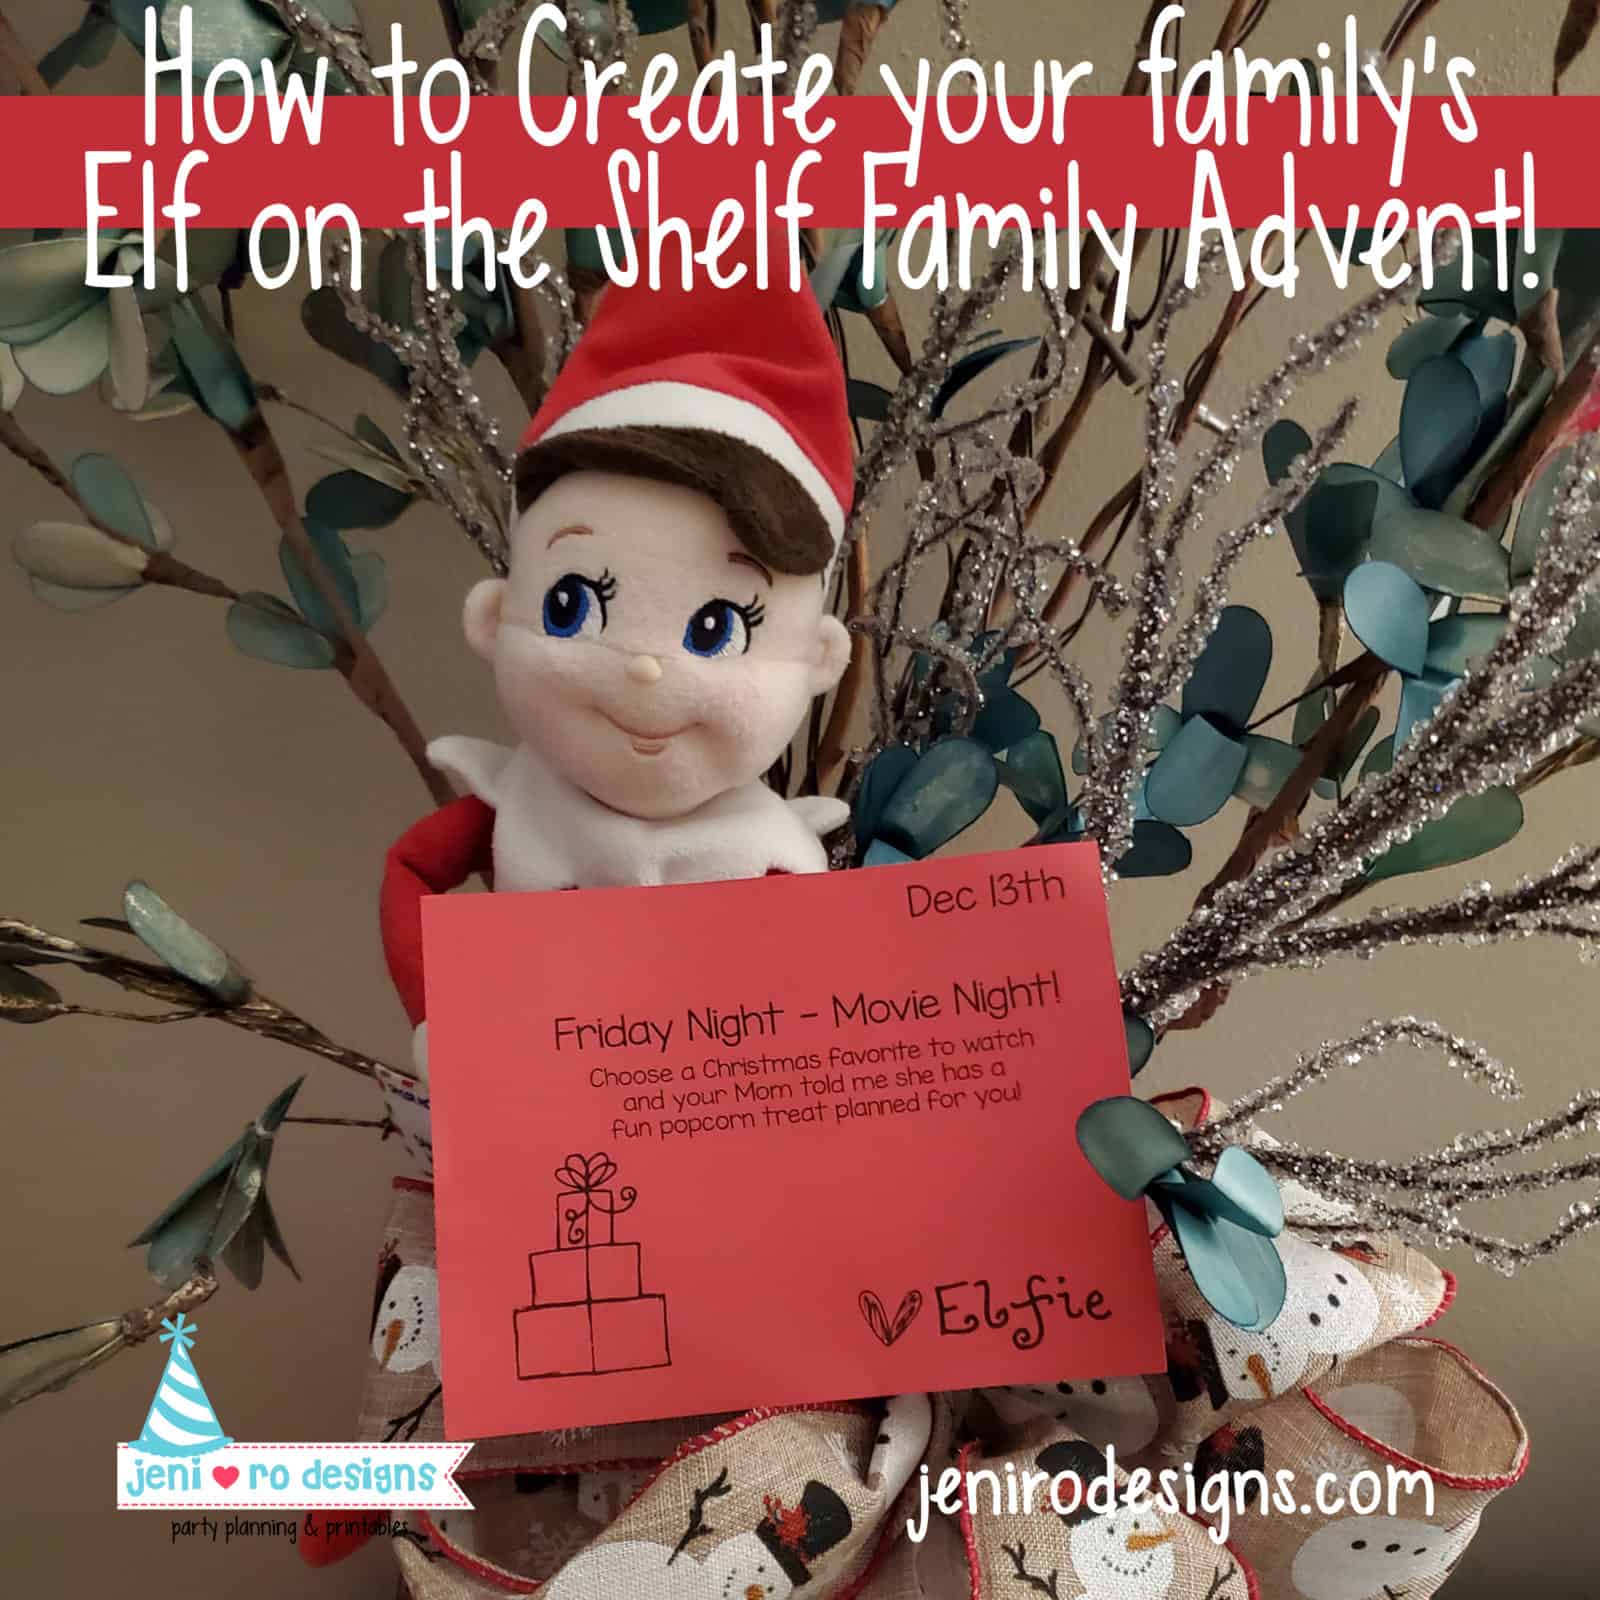 5-steps-to-create-your-own-elf-on-the-shelf-family-advent